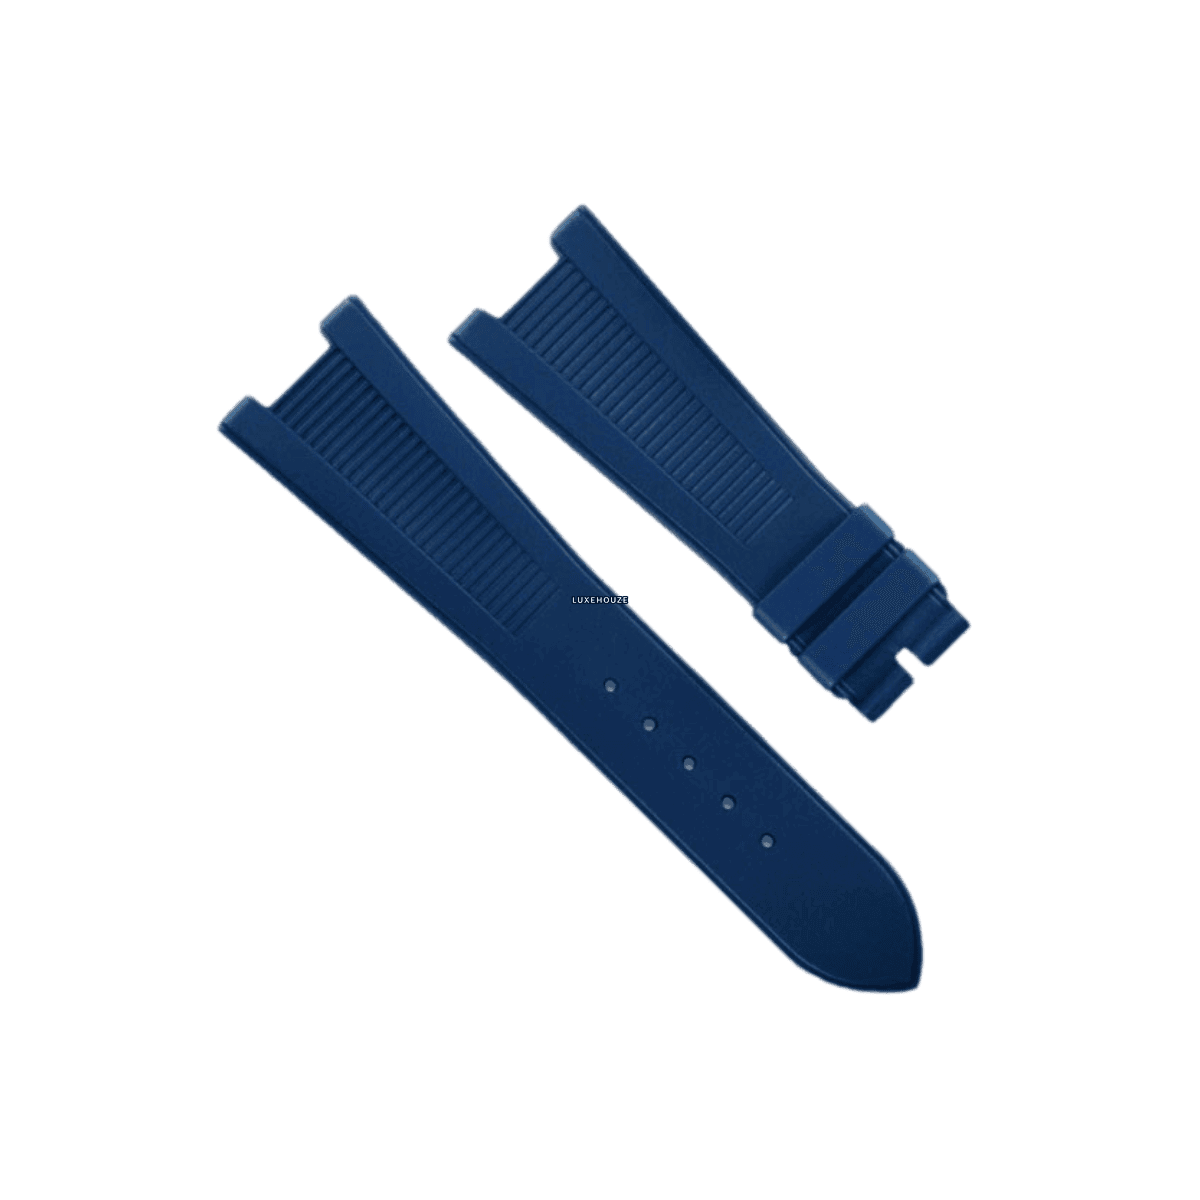 Nautilus On Strap Classic Series Watch Bands RUBBER B Navy Blue 